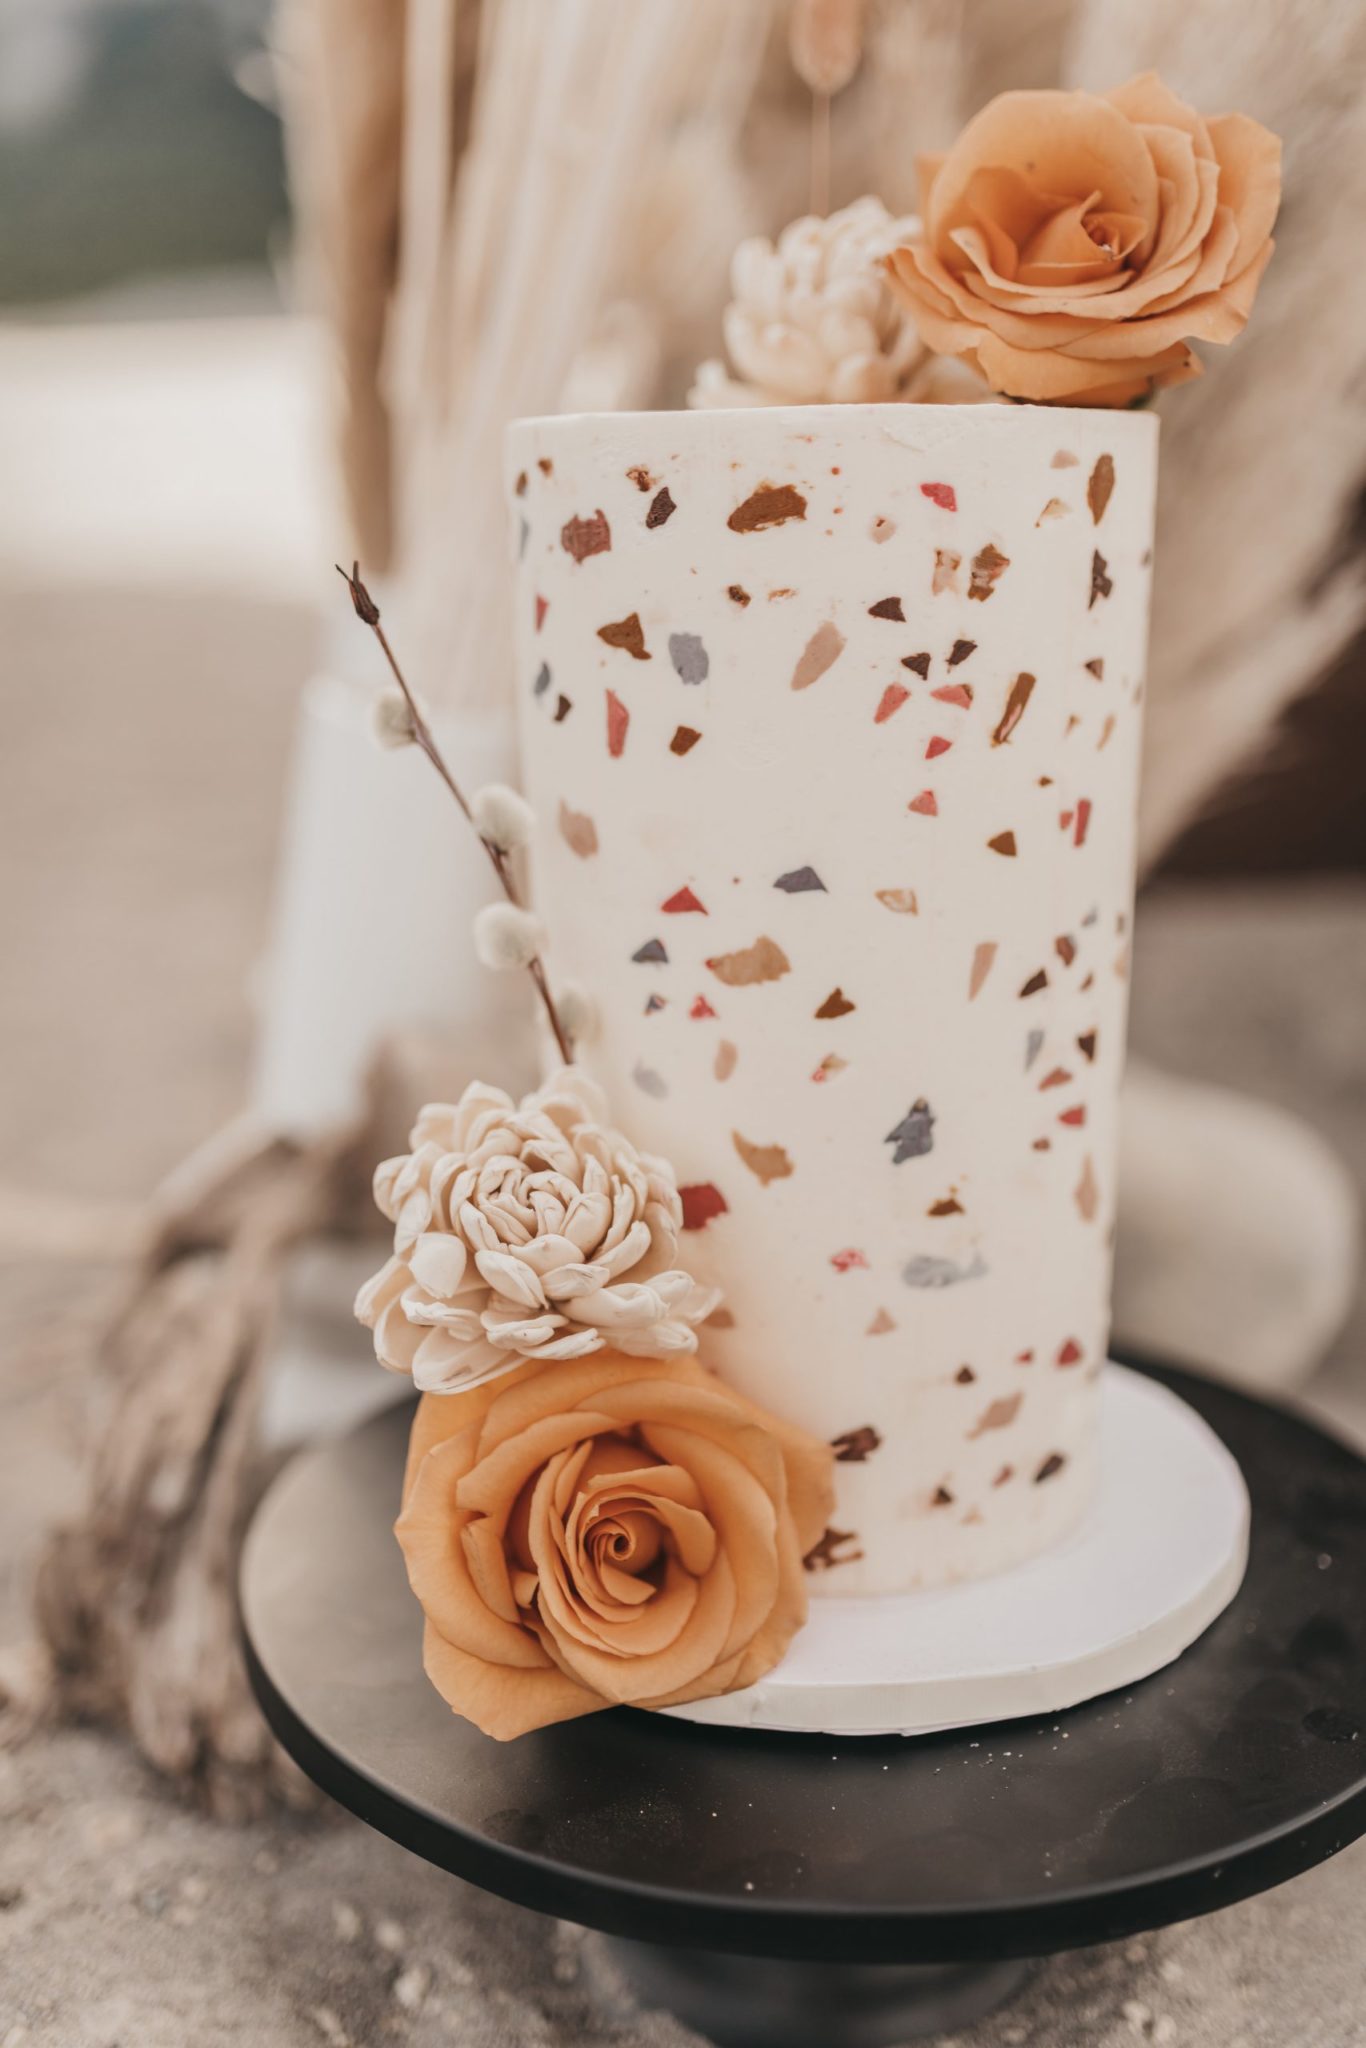 25 Small But Beautiful One-Tier Wedding Cakes Featured by Brontë Bride